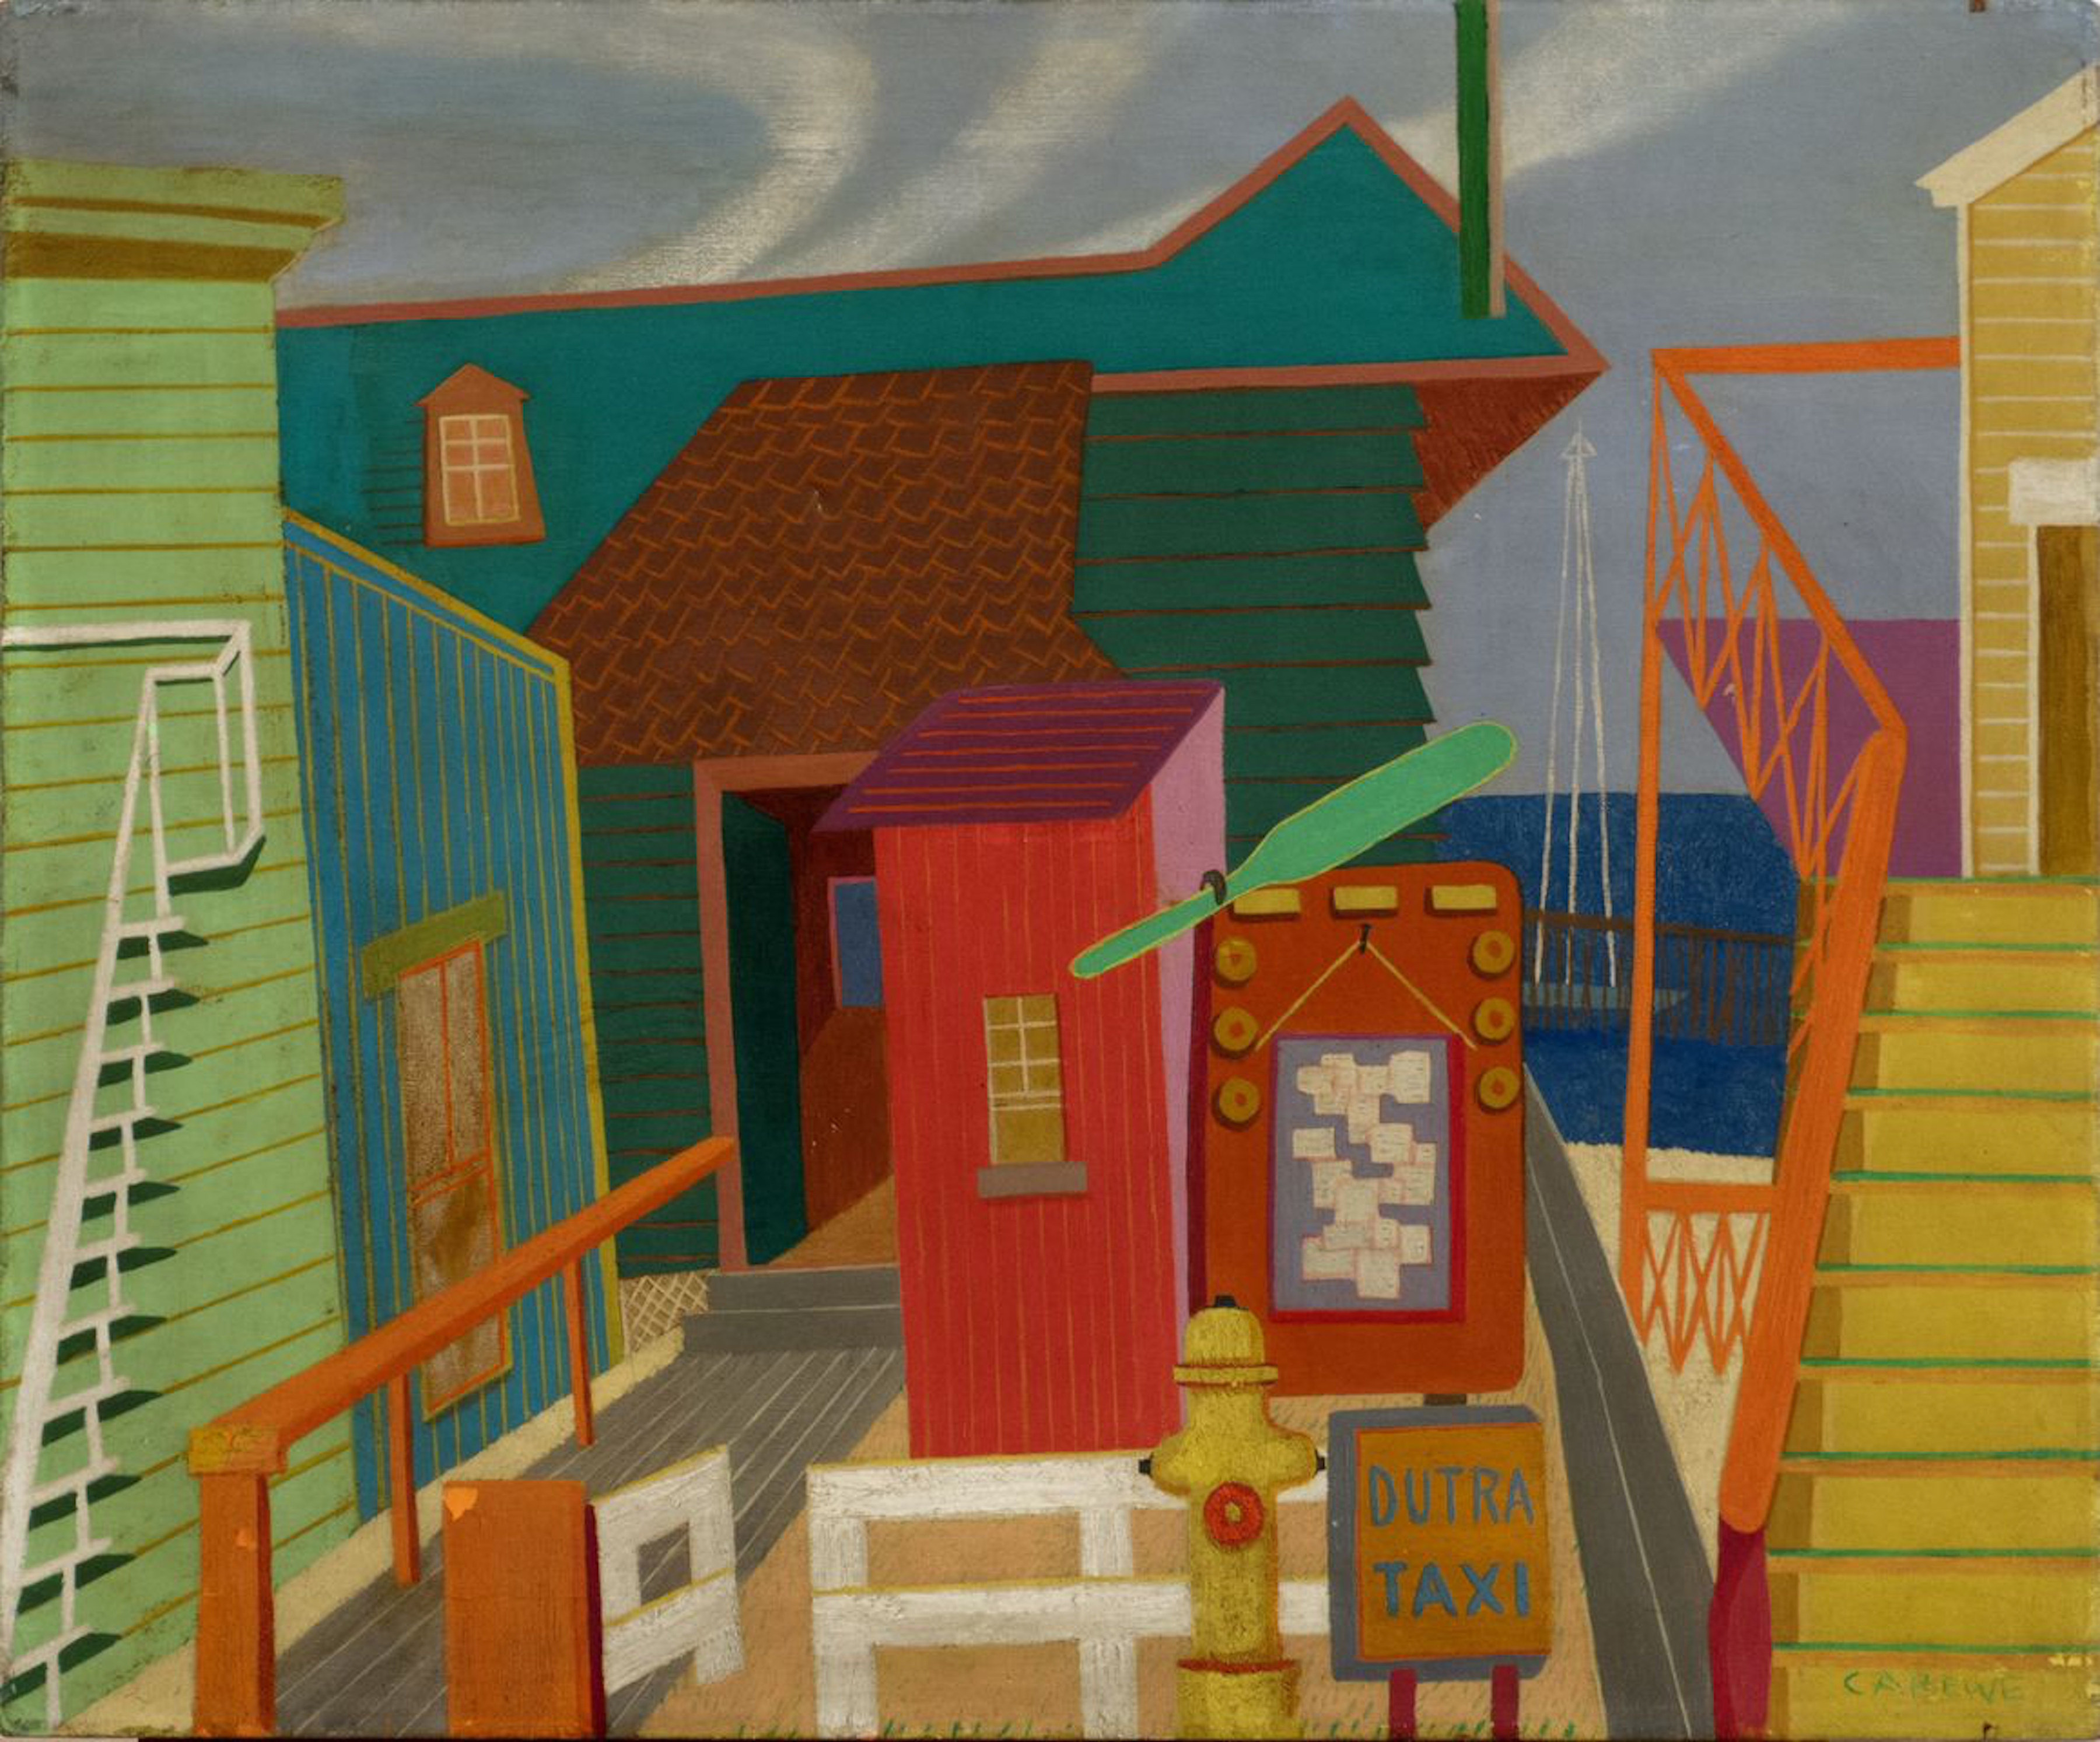 A painting of geometric buildings in bright colors. In the background a portion of a body of water is showing. At the front of a composition there is an orange bulletin board with white slips of paper tacked to a muted blue portion in the center of it. In front of the bulletin board there is a yellow fire hydrant with a small light orange and blue sign next to it that reads &quot;Dutra Taxi&quot;.